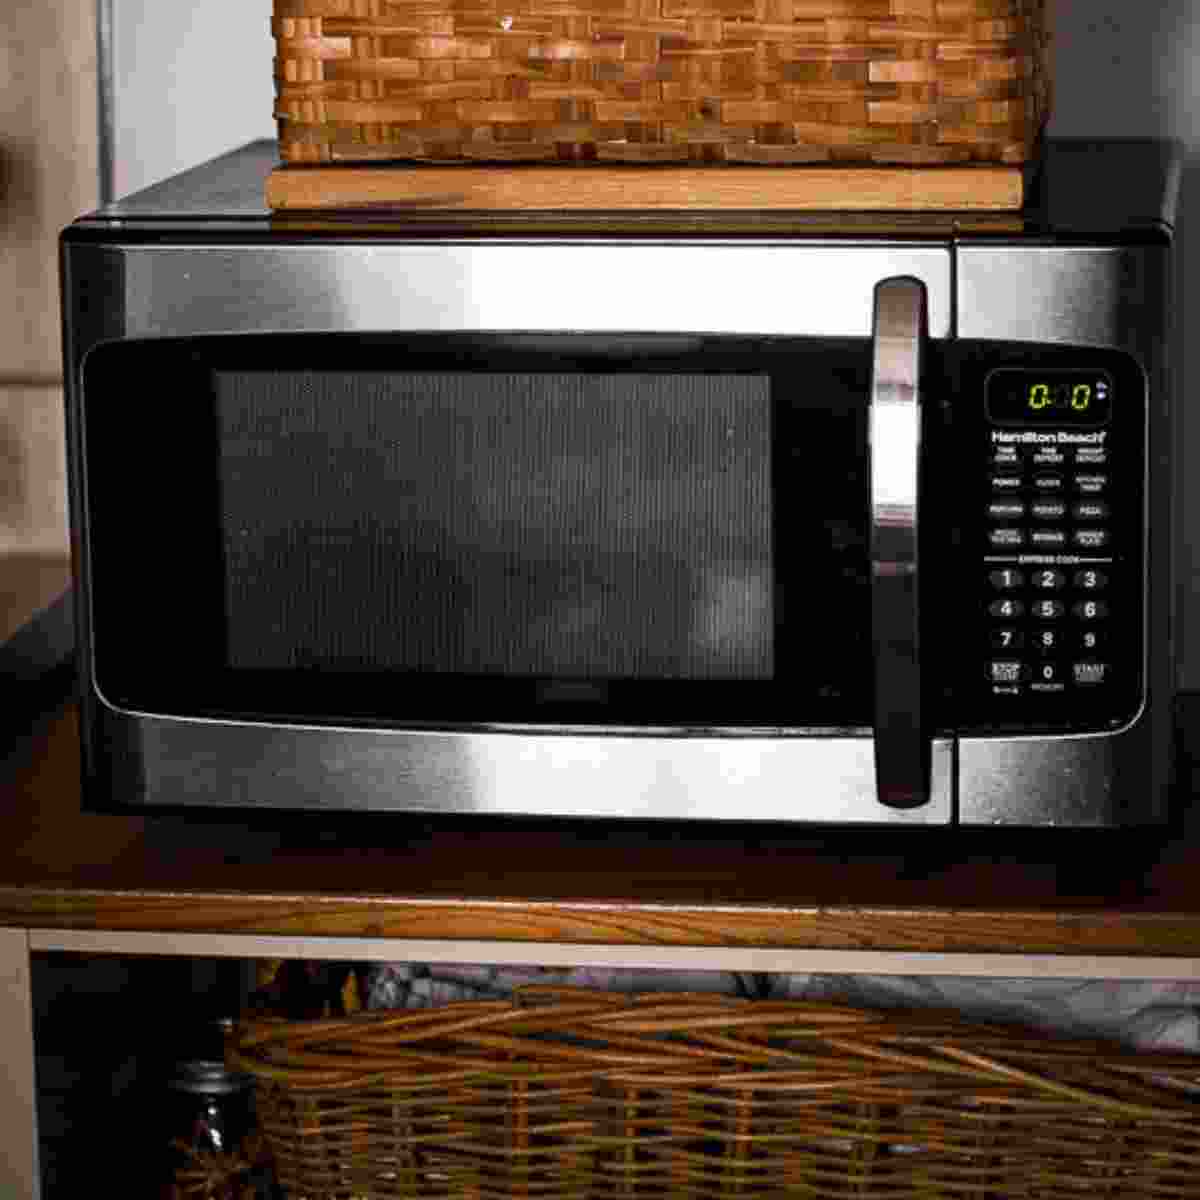 Microwave Cleaning Hack